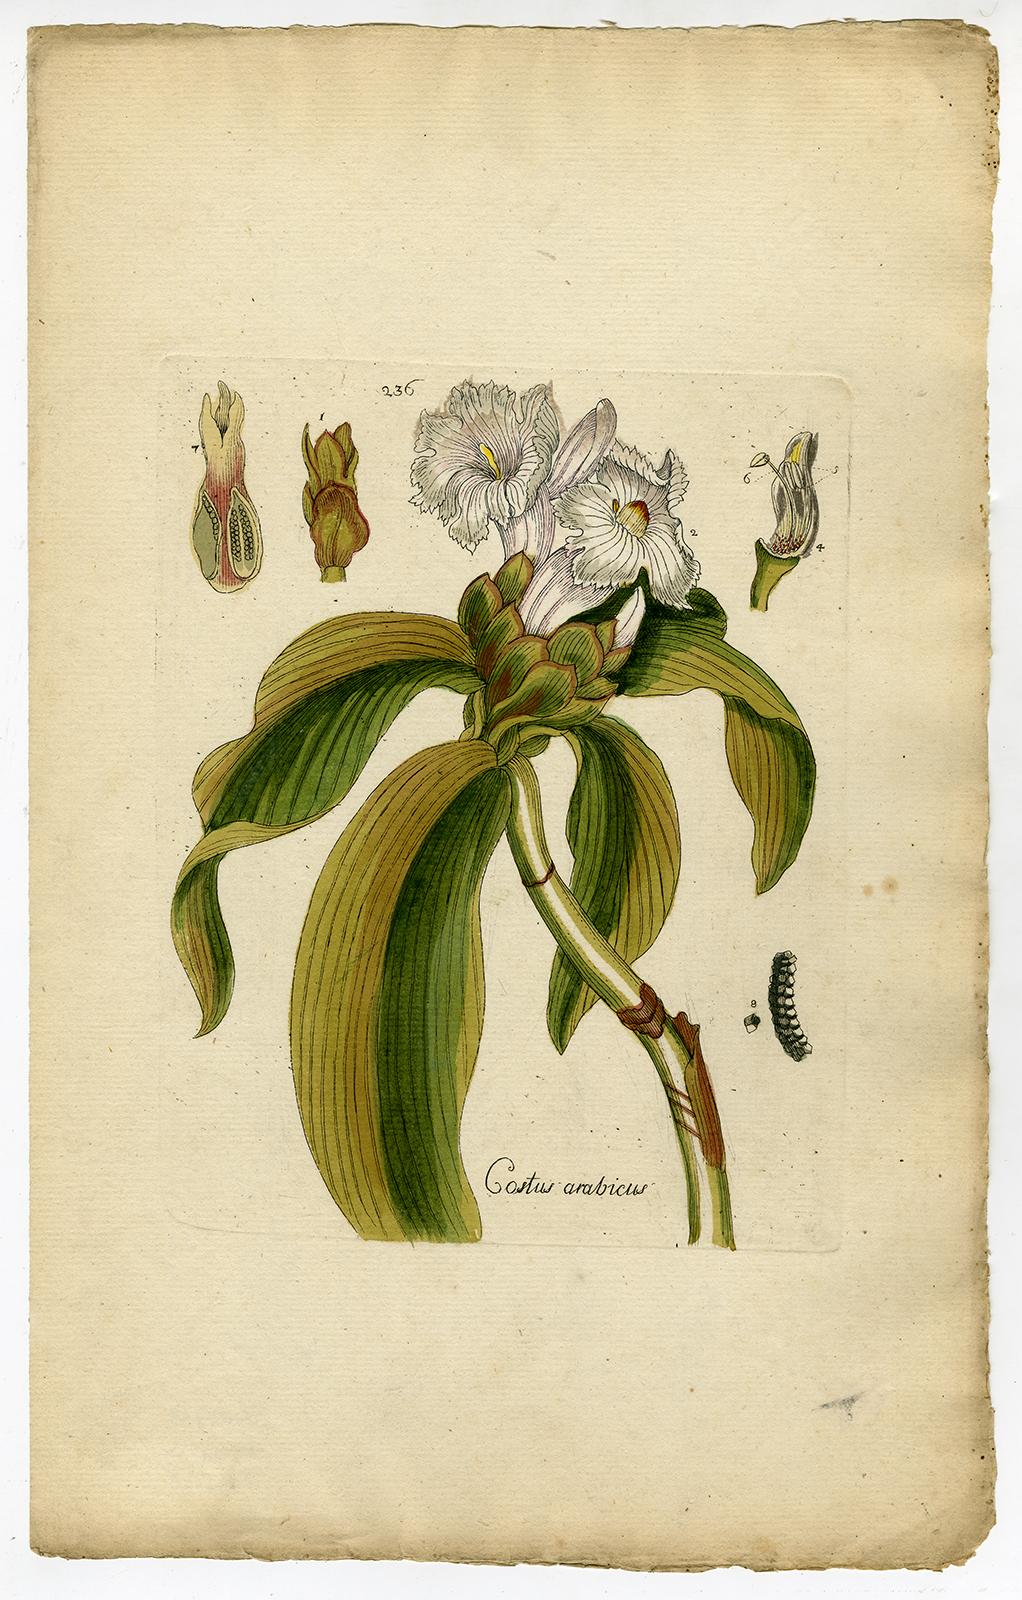 Ginger from Medicinal Plants by Happe - Handcoloured engraving - 18th century - Print by Andreas Friedrich Happe